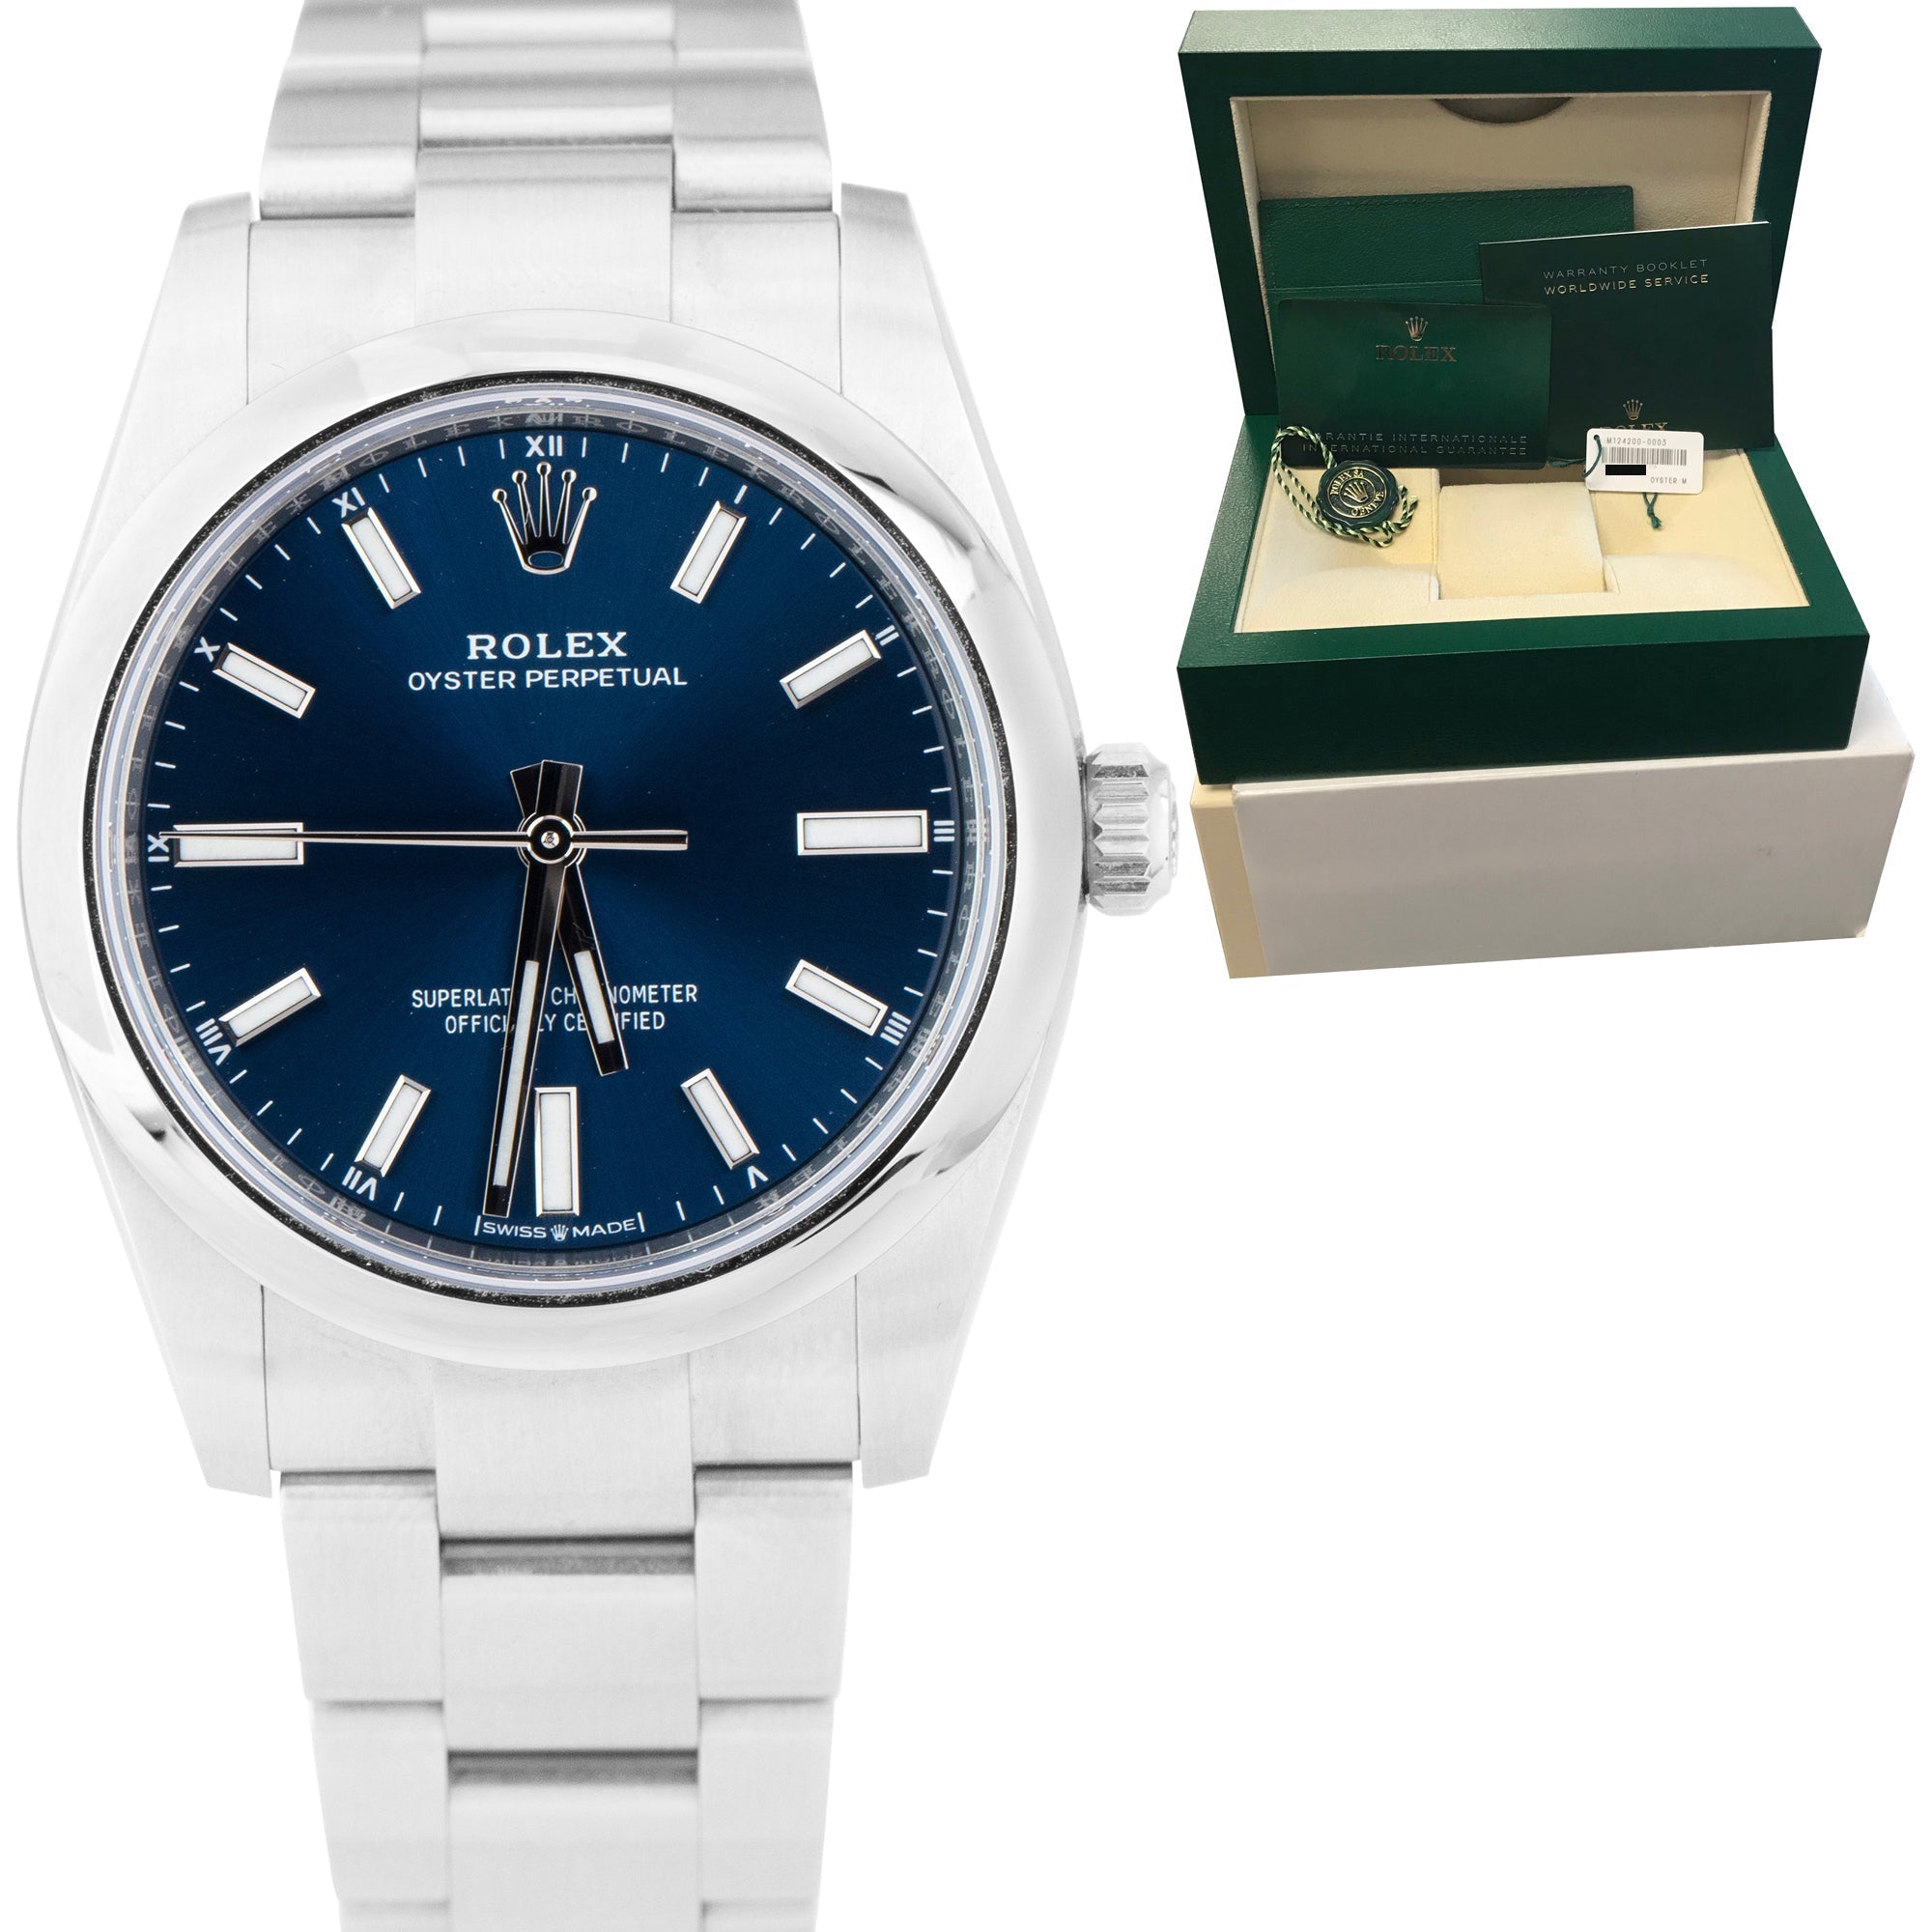 NEW APR. 2022 Rolex Oyster Perpetual 34mm Stainless Steel Blue Watch 124200